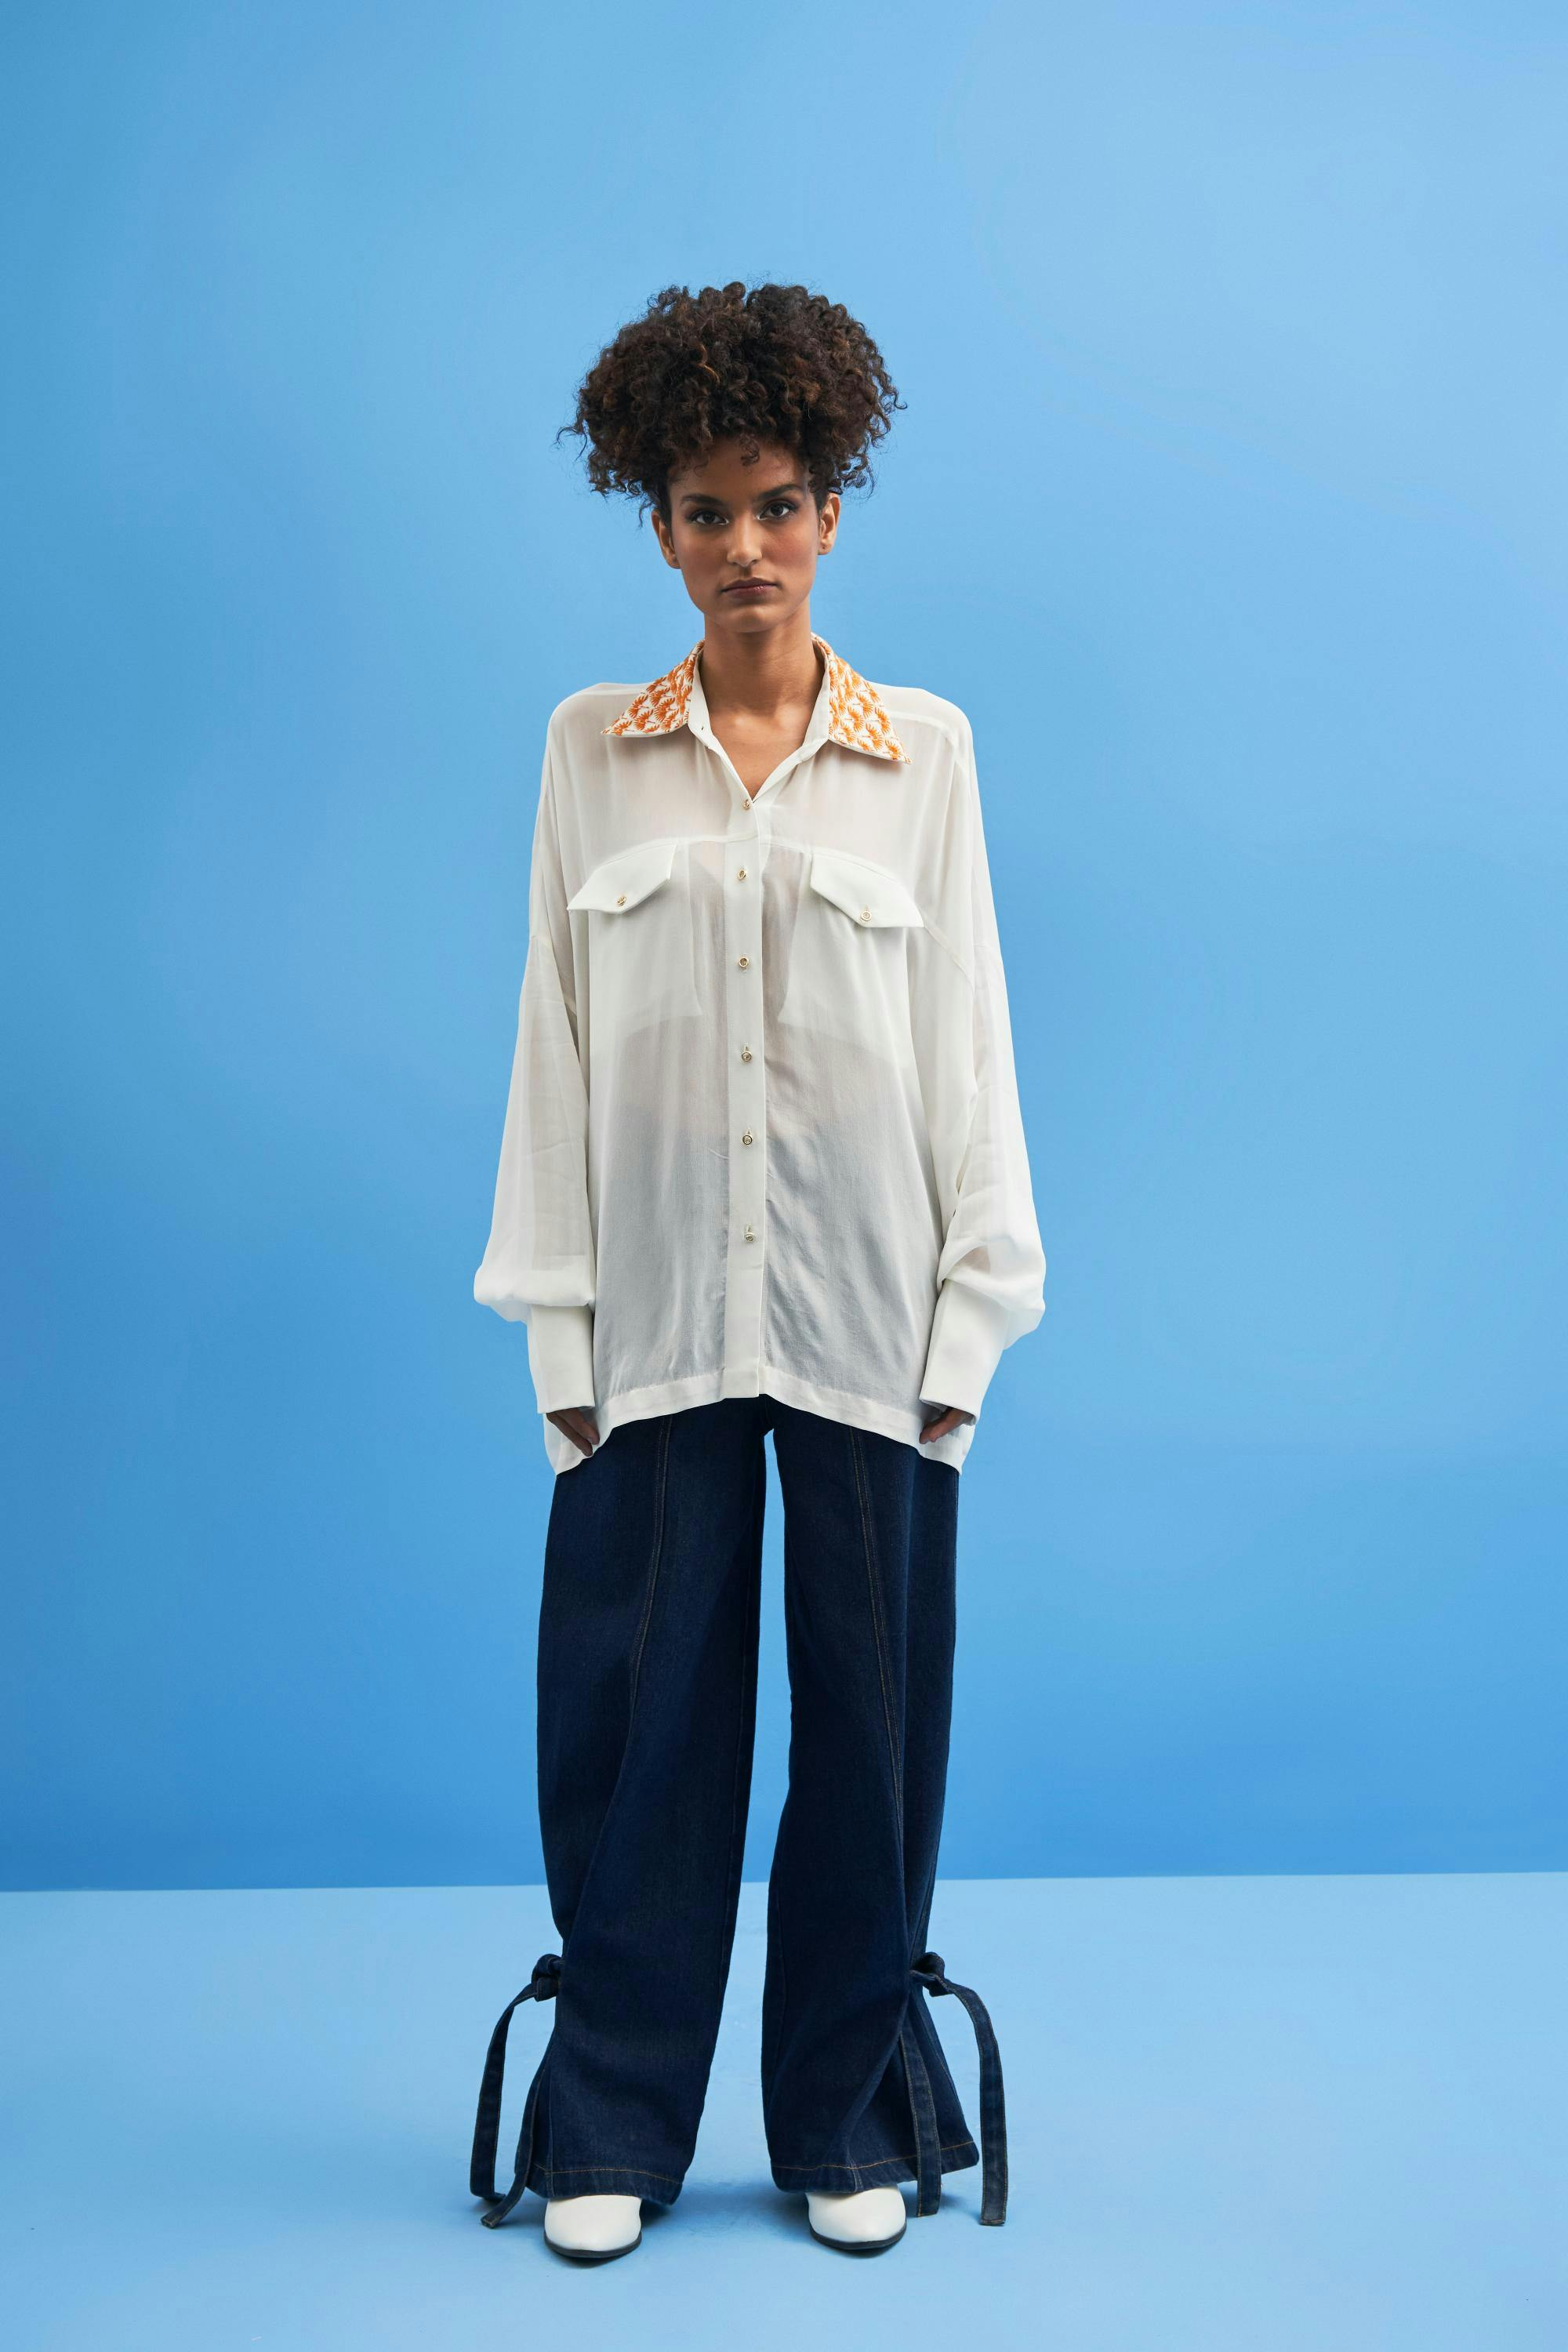 Off-White Crane-Collared Shirt, a product by Siddhant Agrawal Label